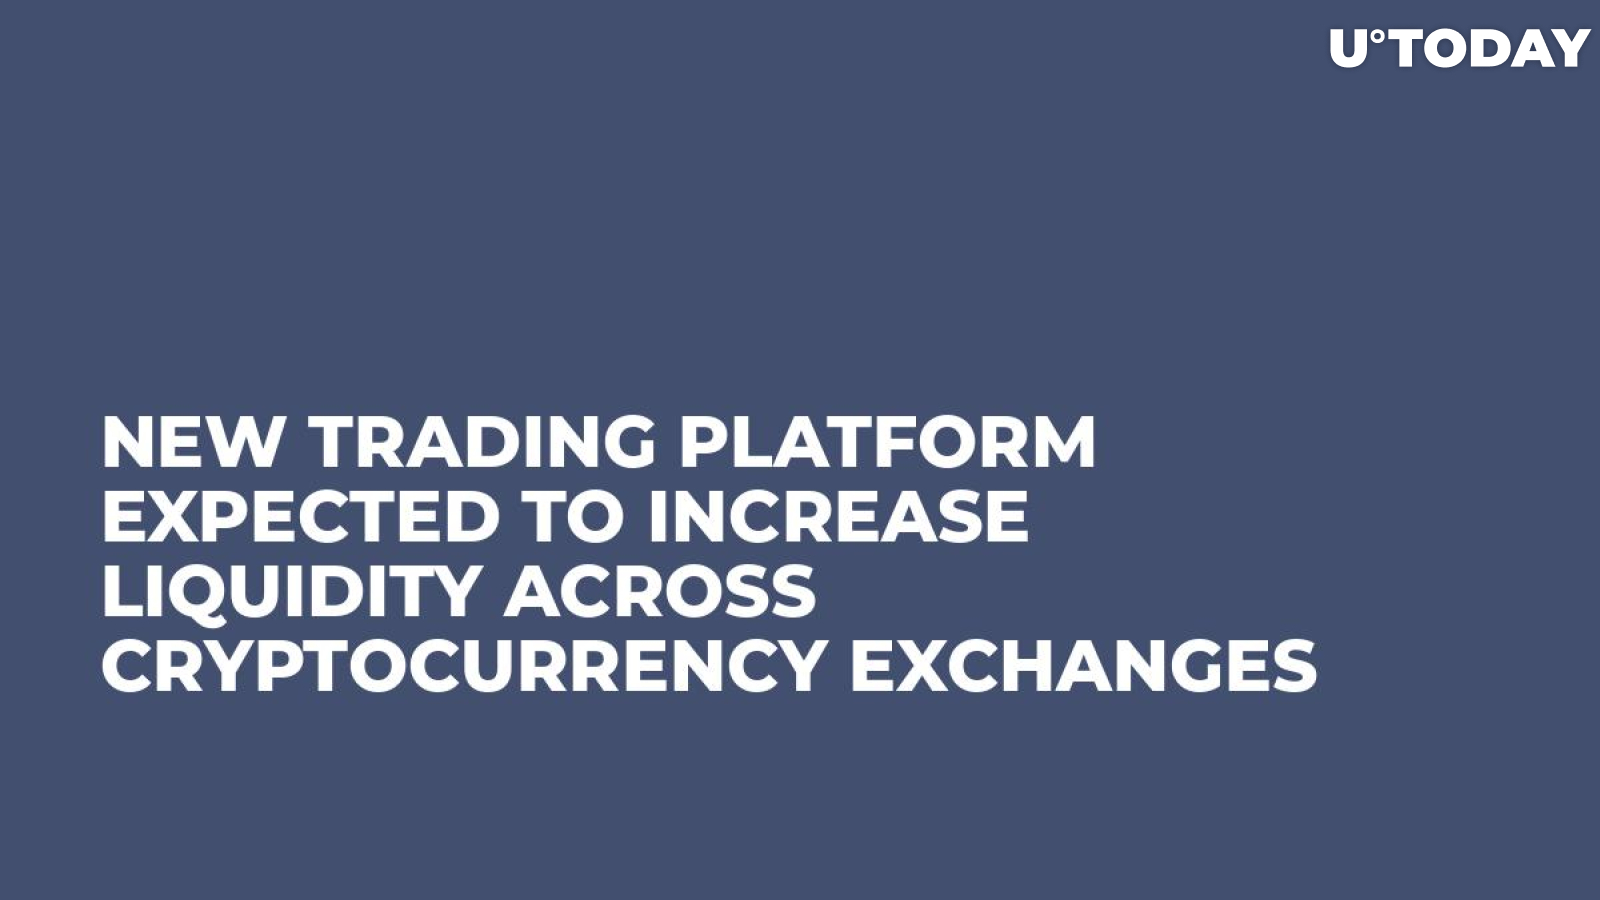 New Trading Platform Expected to Increase Liquidity Across Cryptocurrency Exchanges 